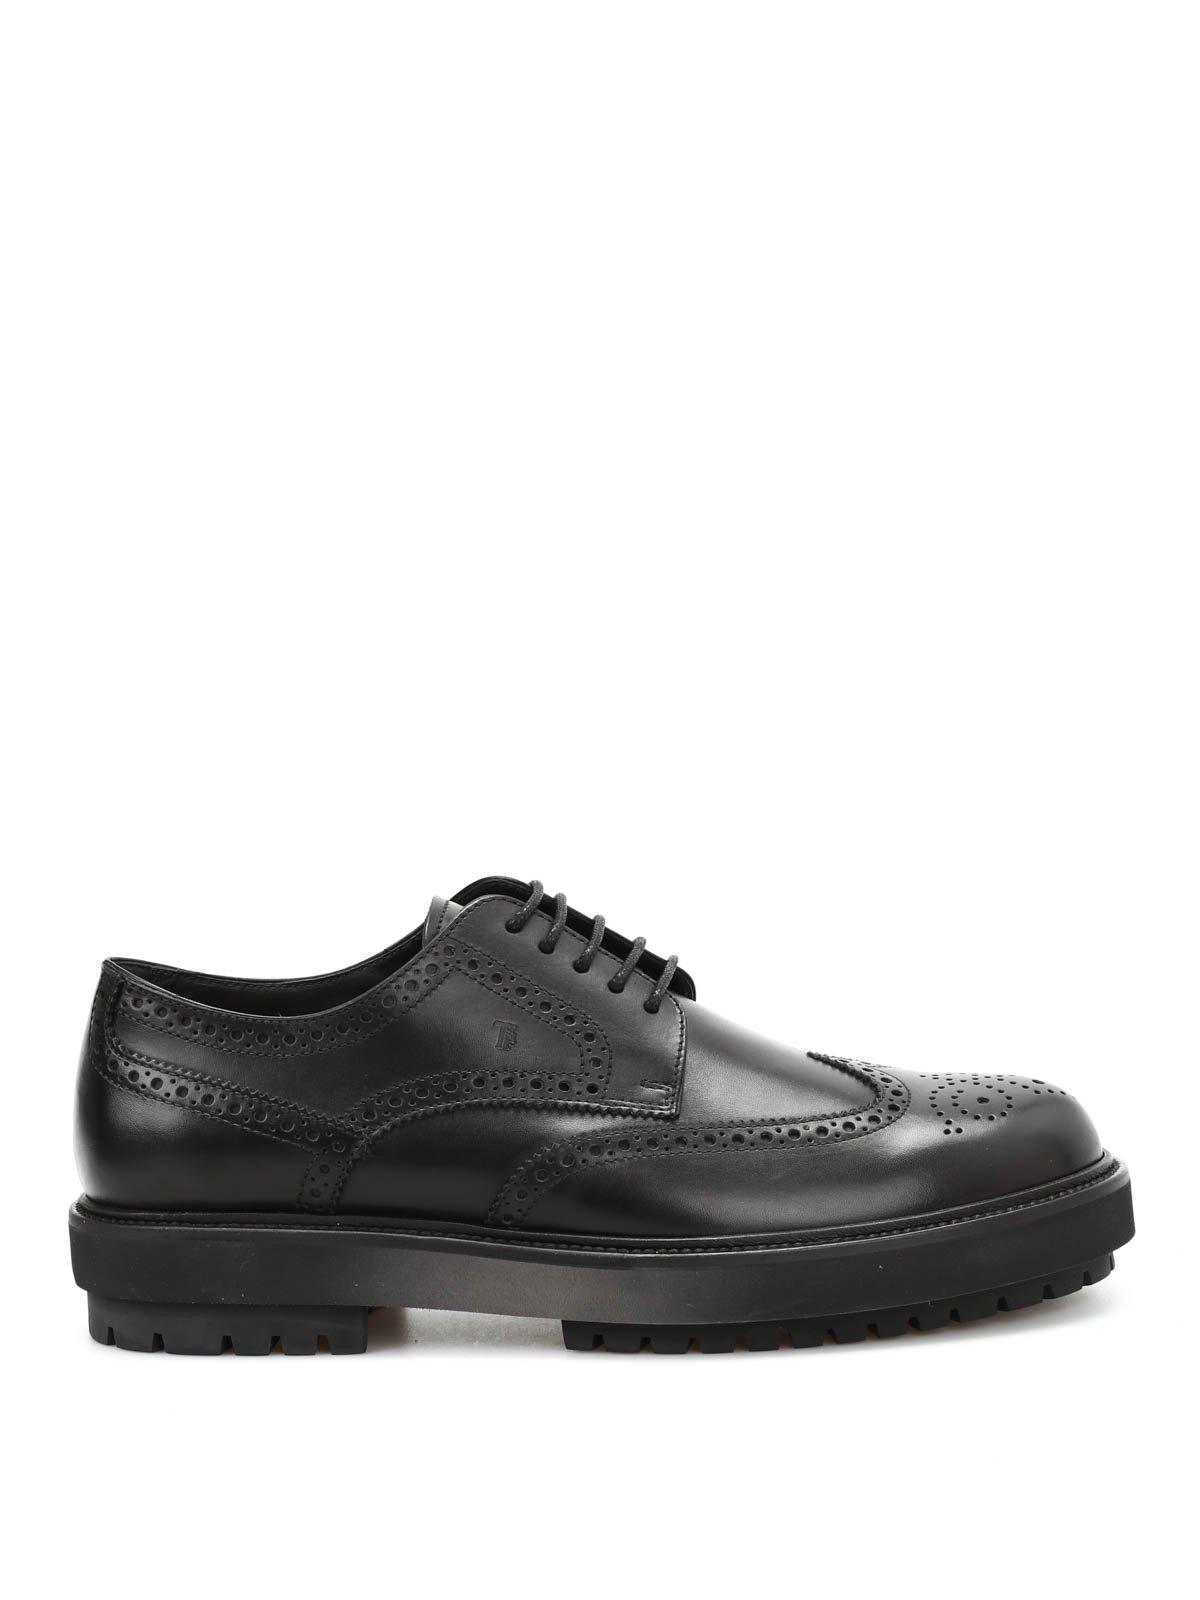 Tod's Chunky Sole Leather Brogues in Black for Men - Lyst